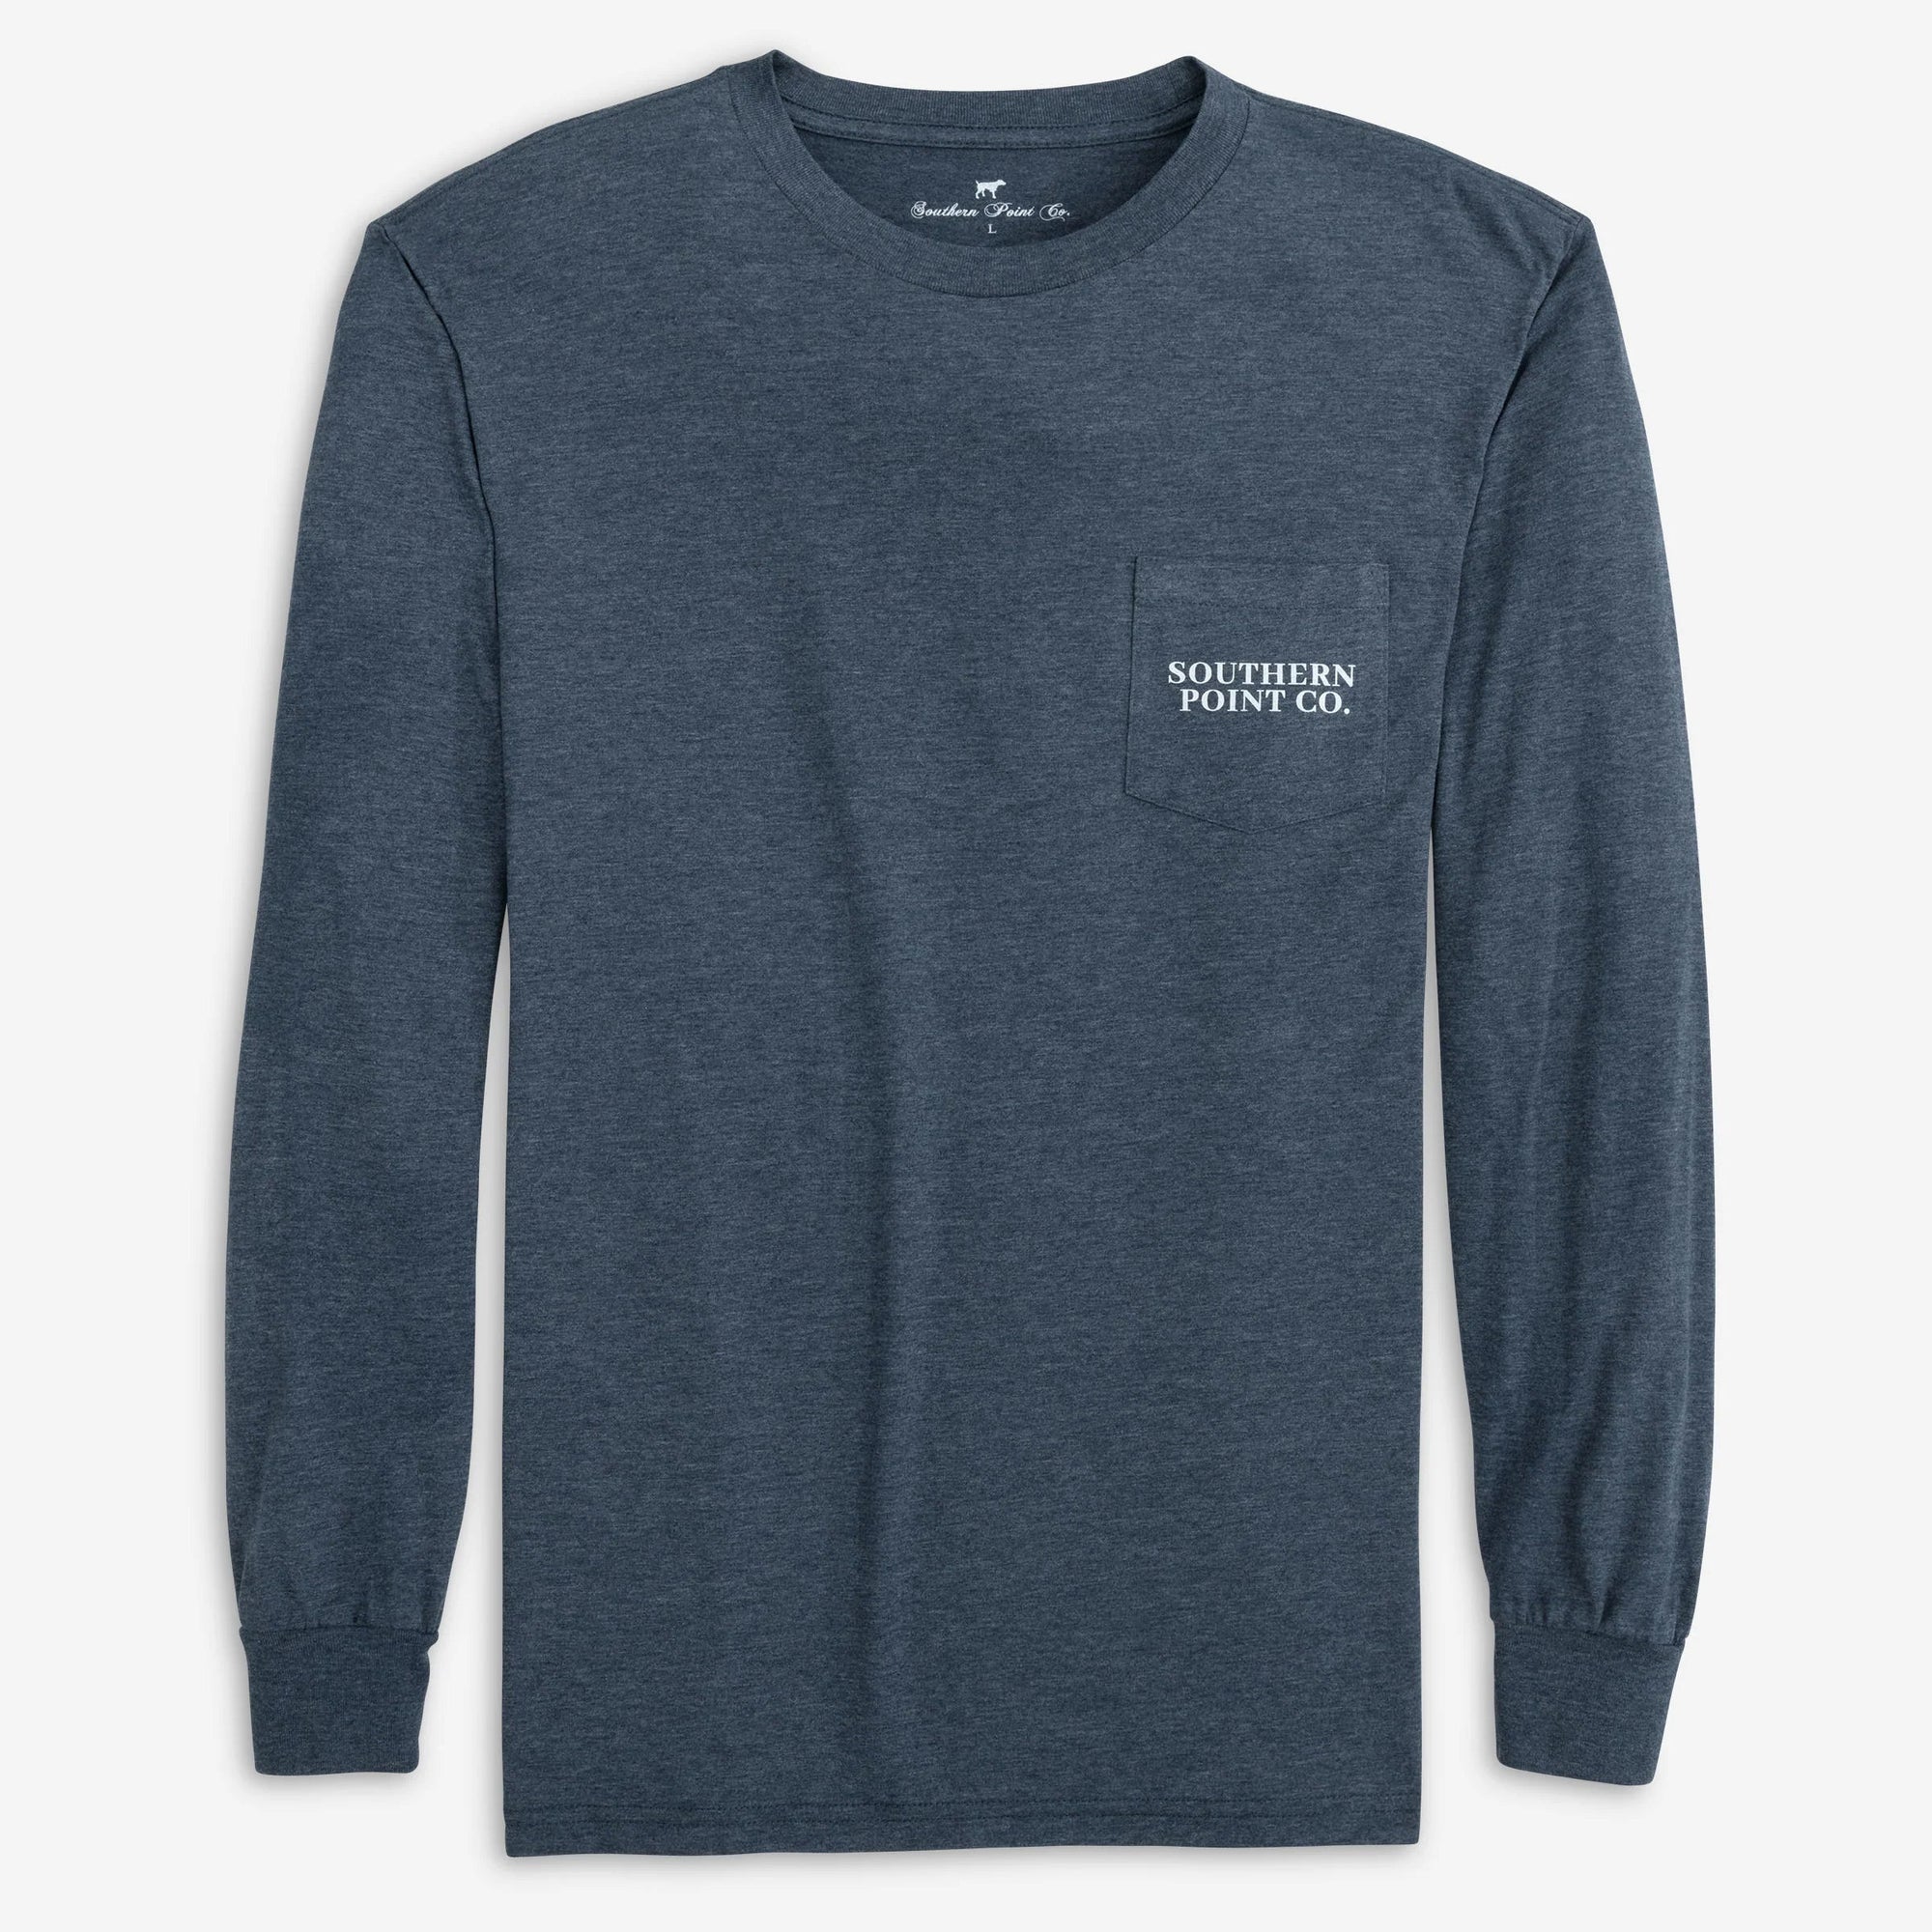 Southern Point Co. Men's Tees Southern Point Field Shot LS Tee || David's Clothing